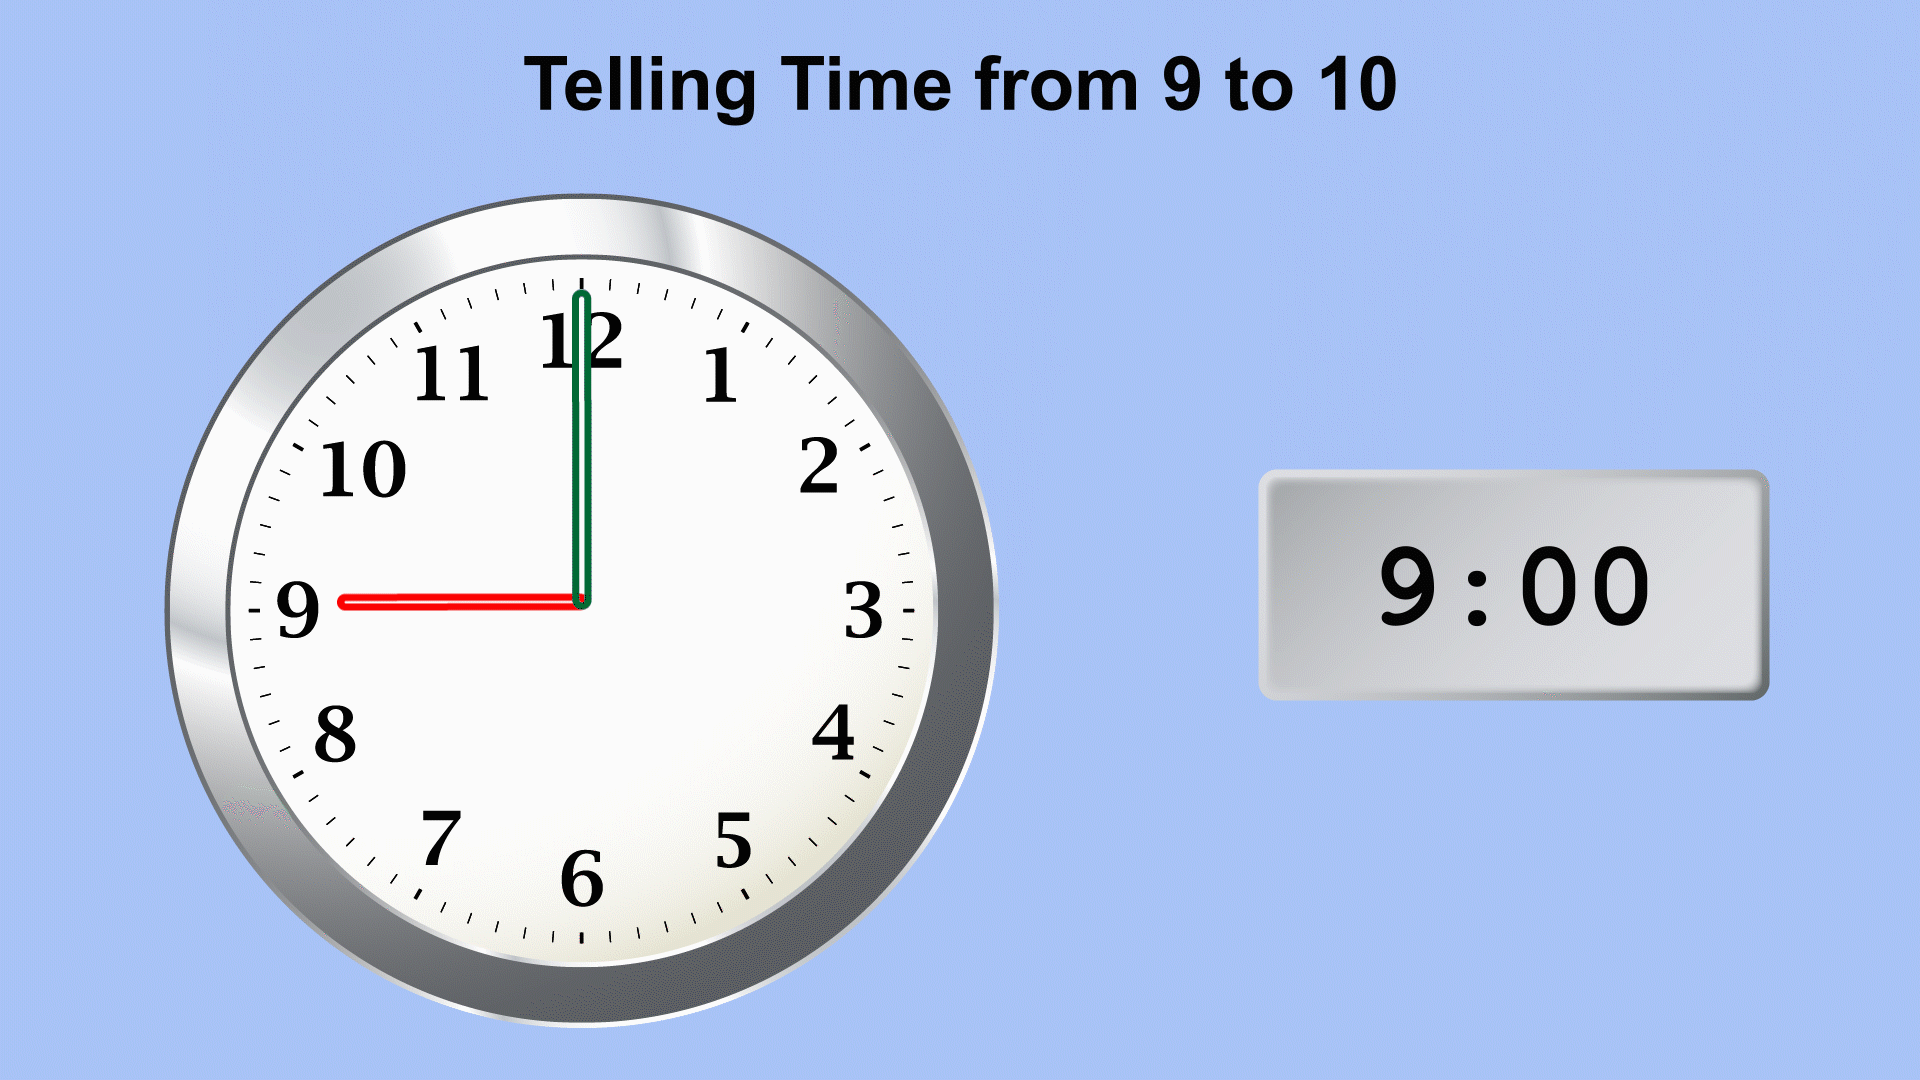 In this animated piece of clip art, see the time change from 9 to 10 in 15-minute increments.